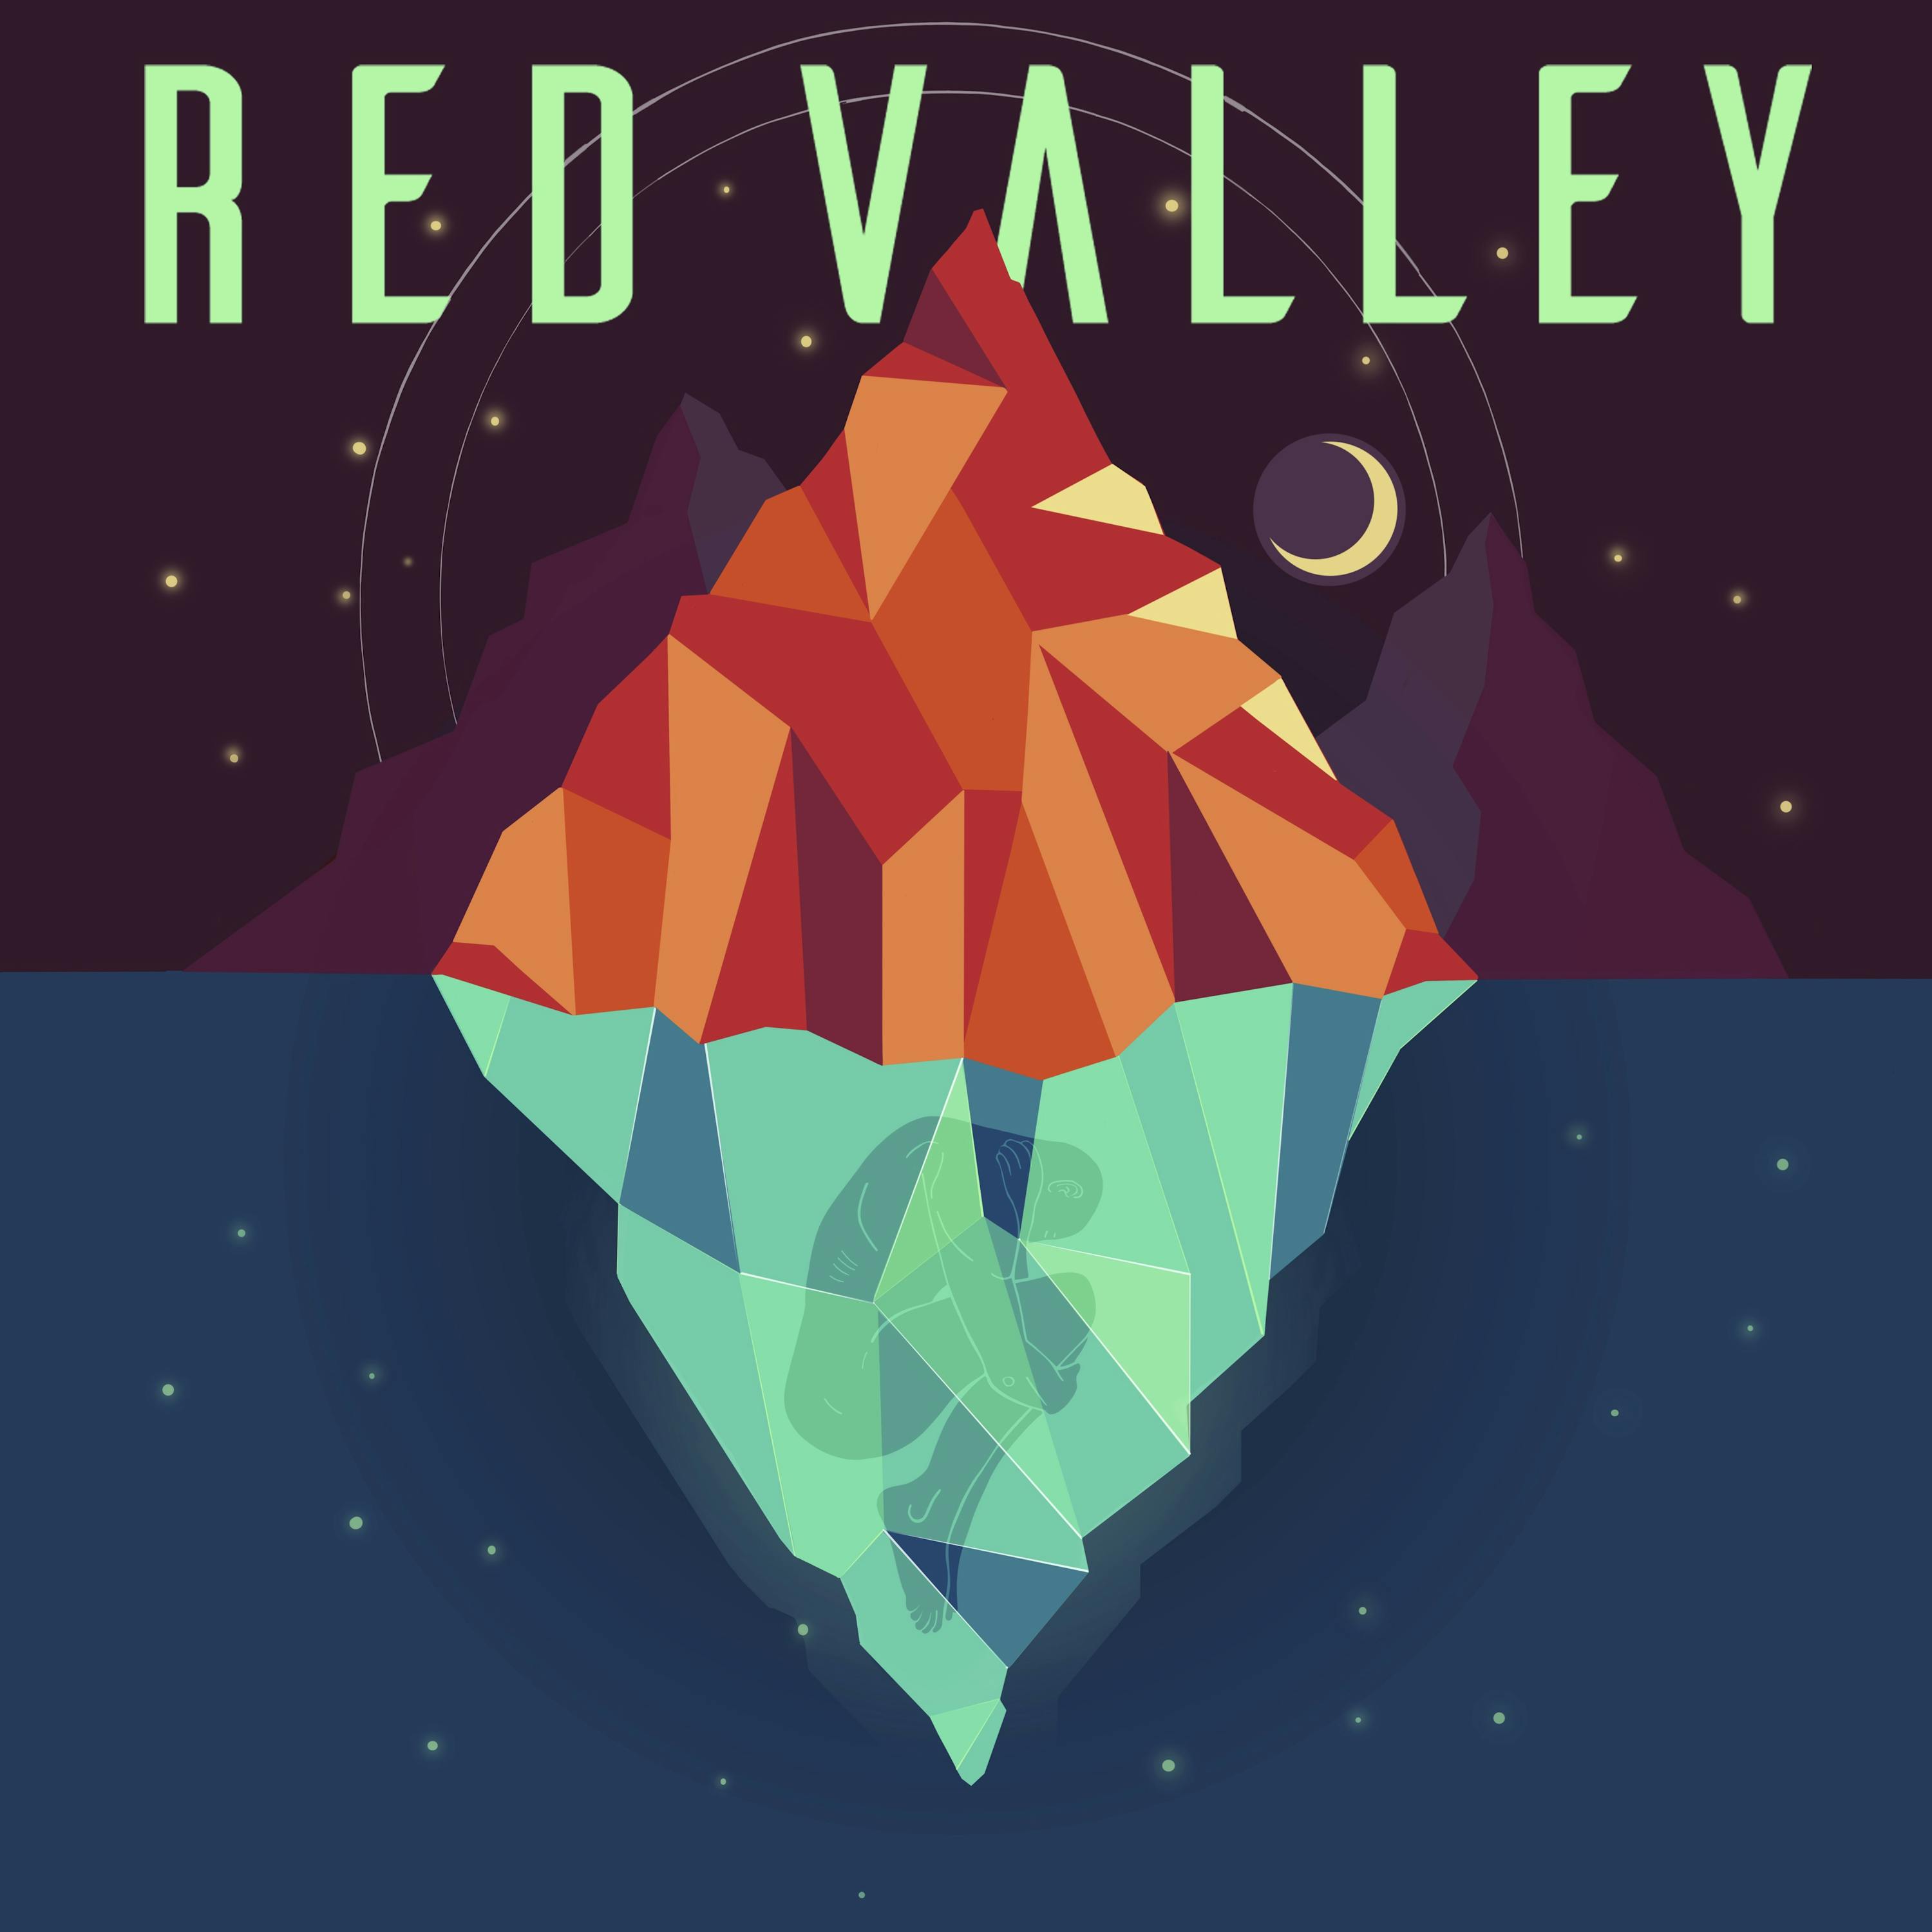 Red Valley podcast